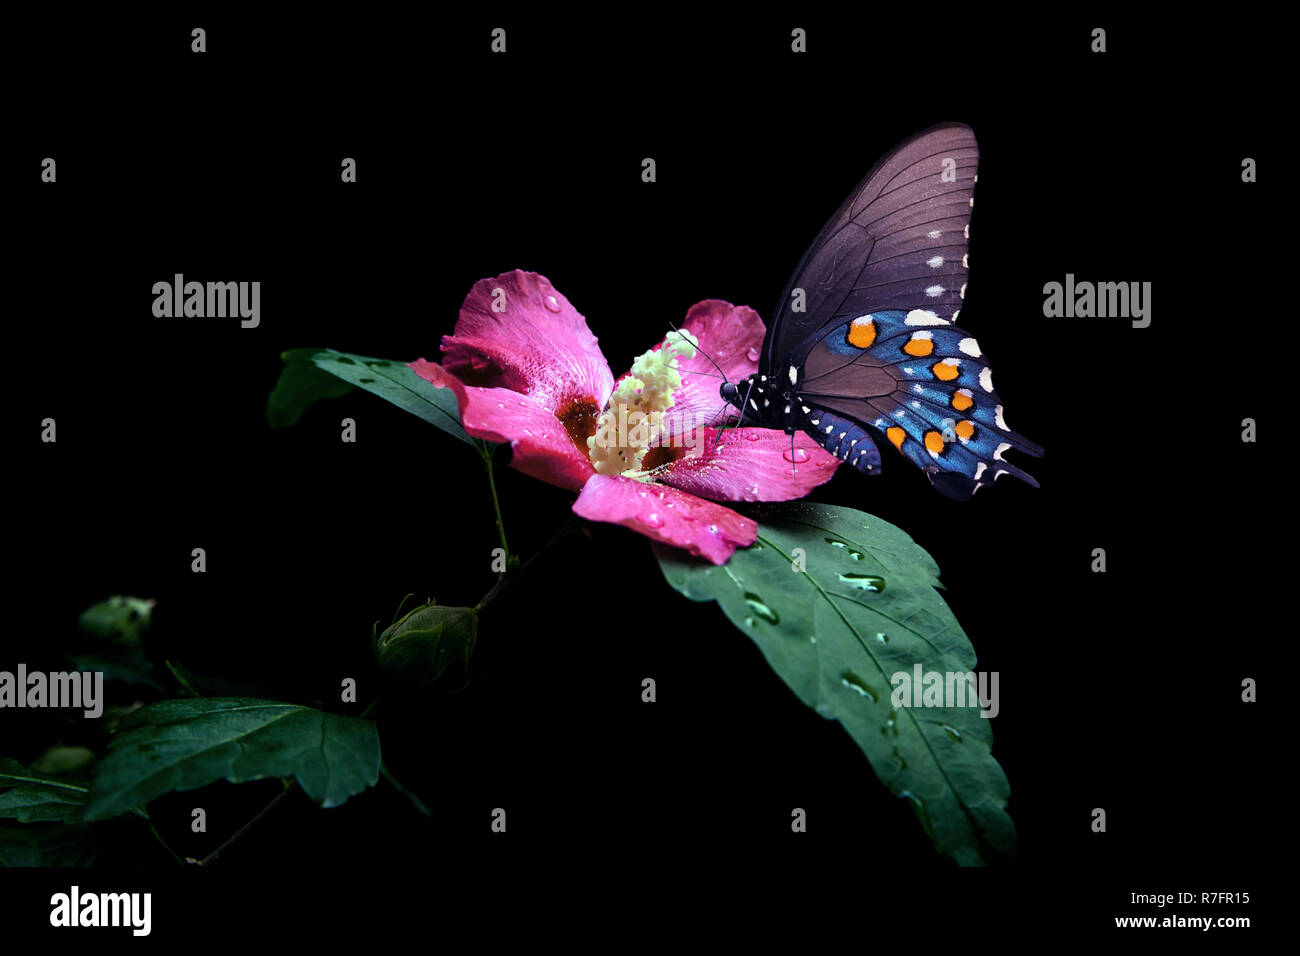 Butterfly on a purple flower, on a black background. Stock Photo